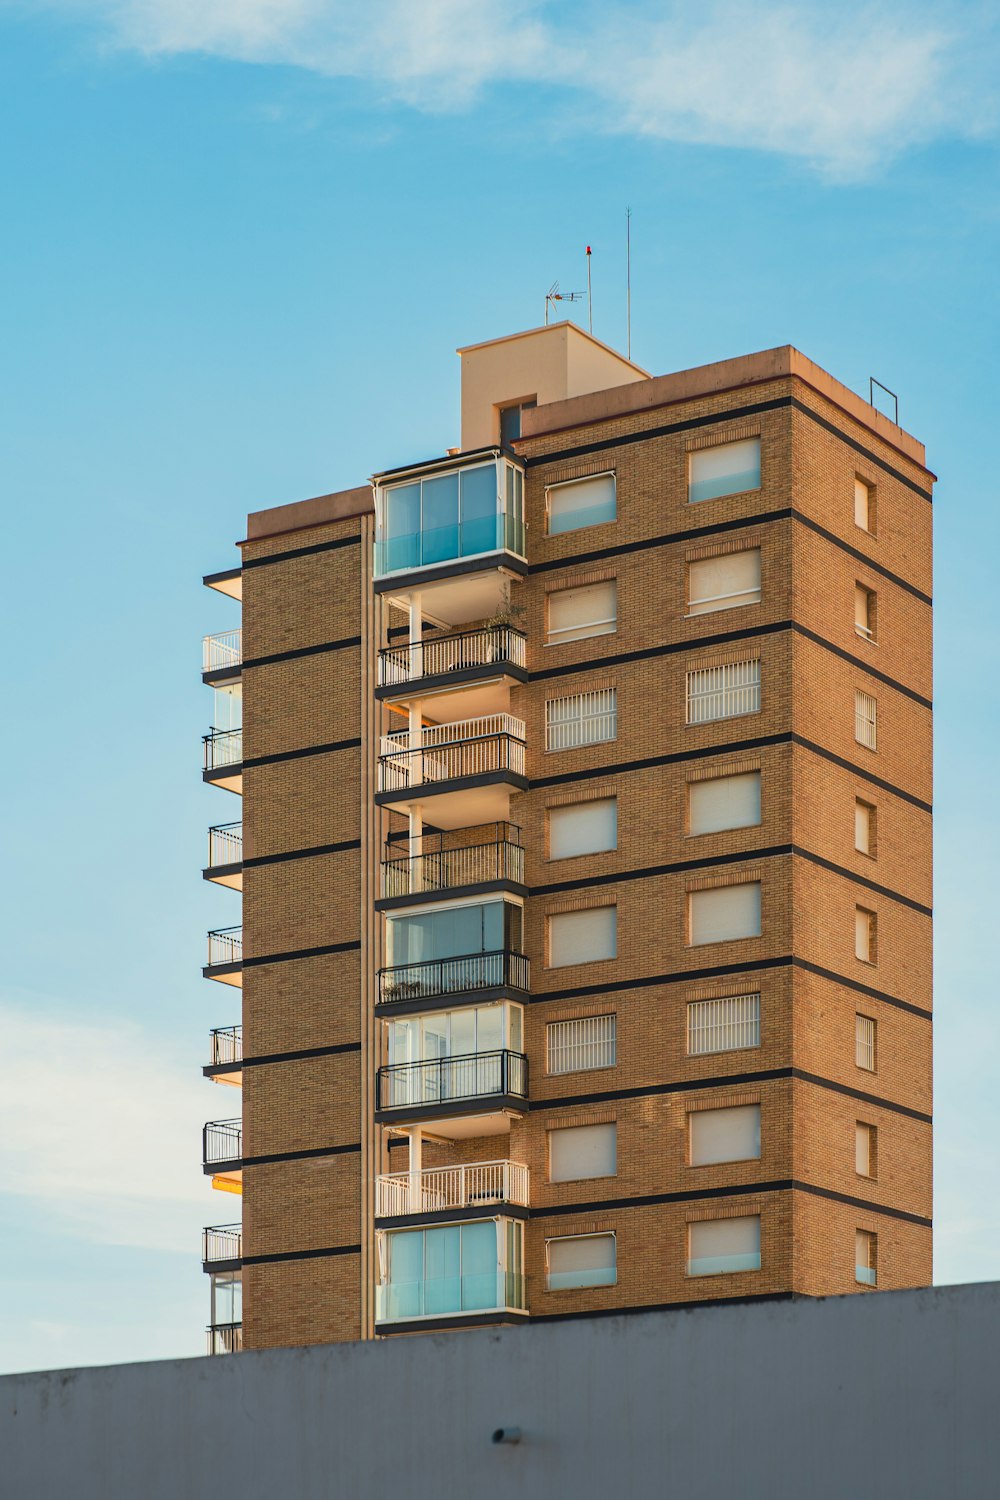 a tall brick building with balconies and balconies on top